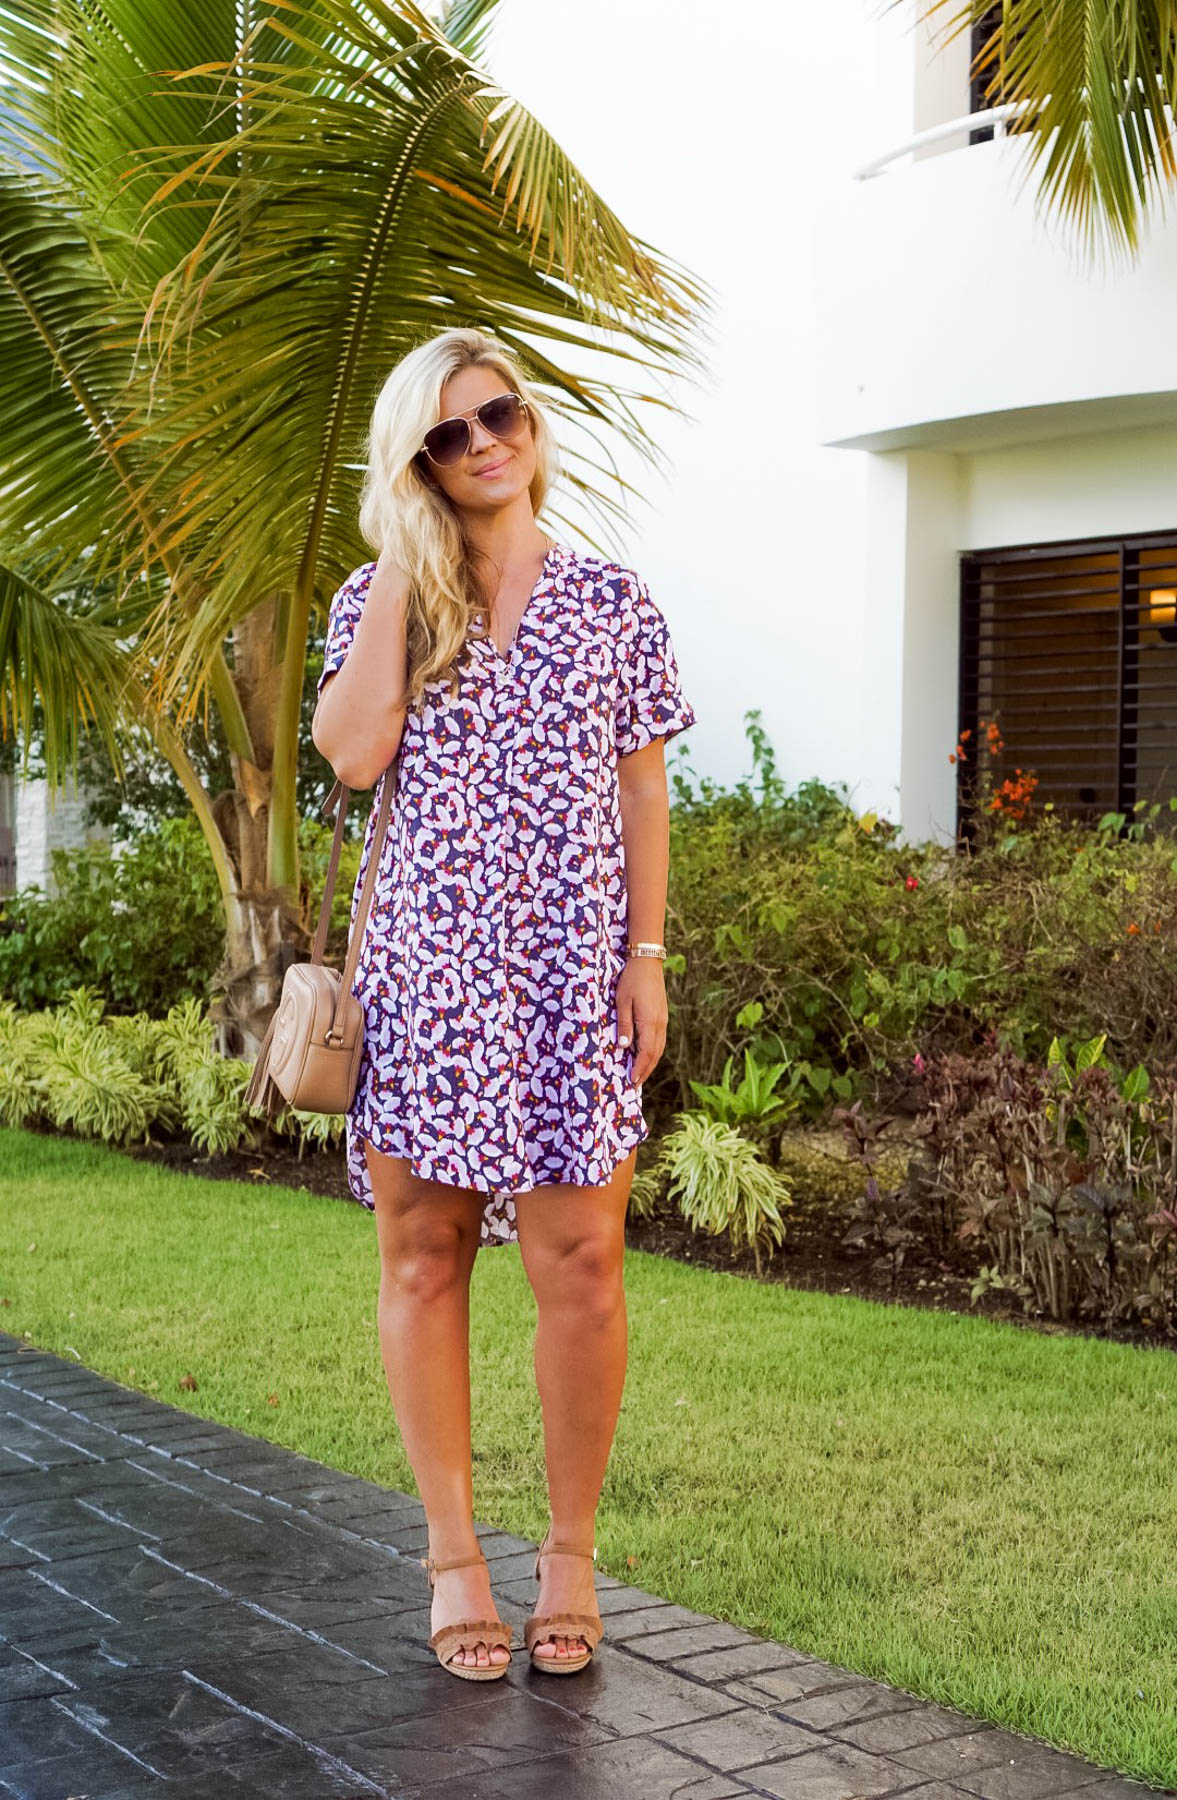 50 Cute Summer Dresses Under $50 featured by popular South Carolina Beauty blogger, The Southern Style Guide